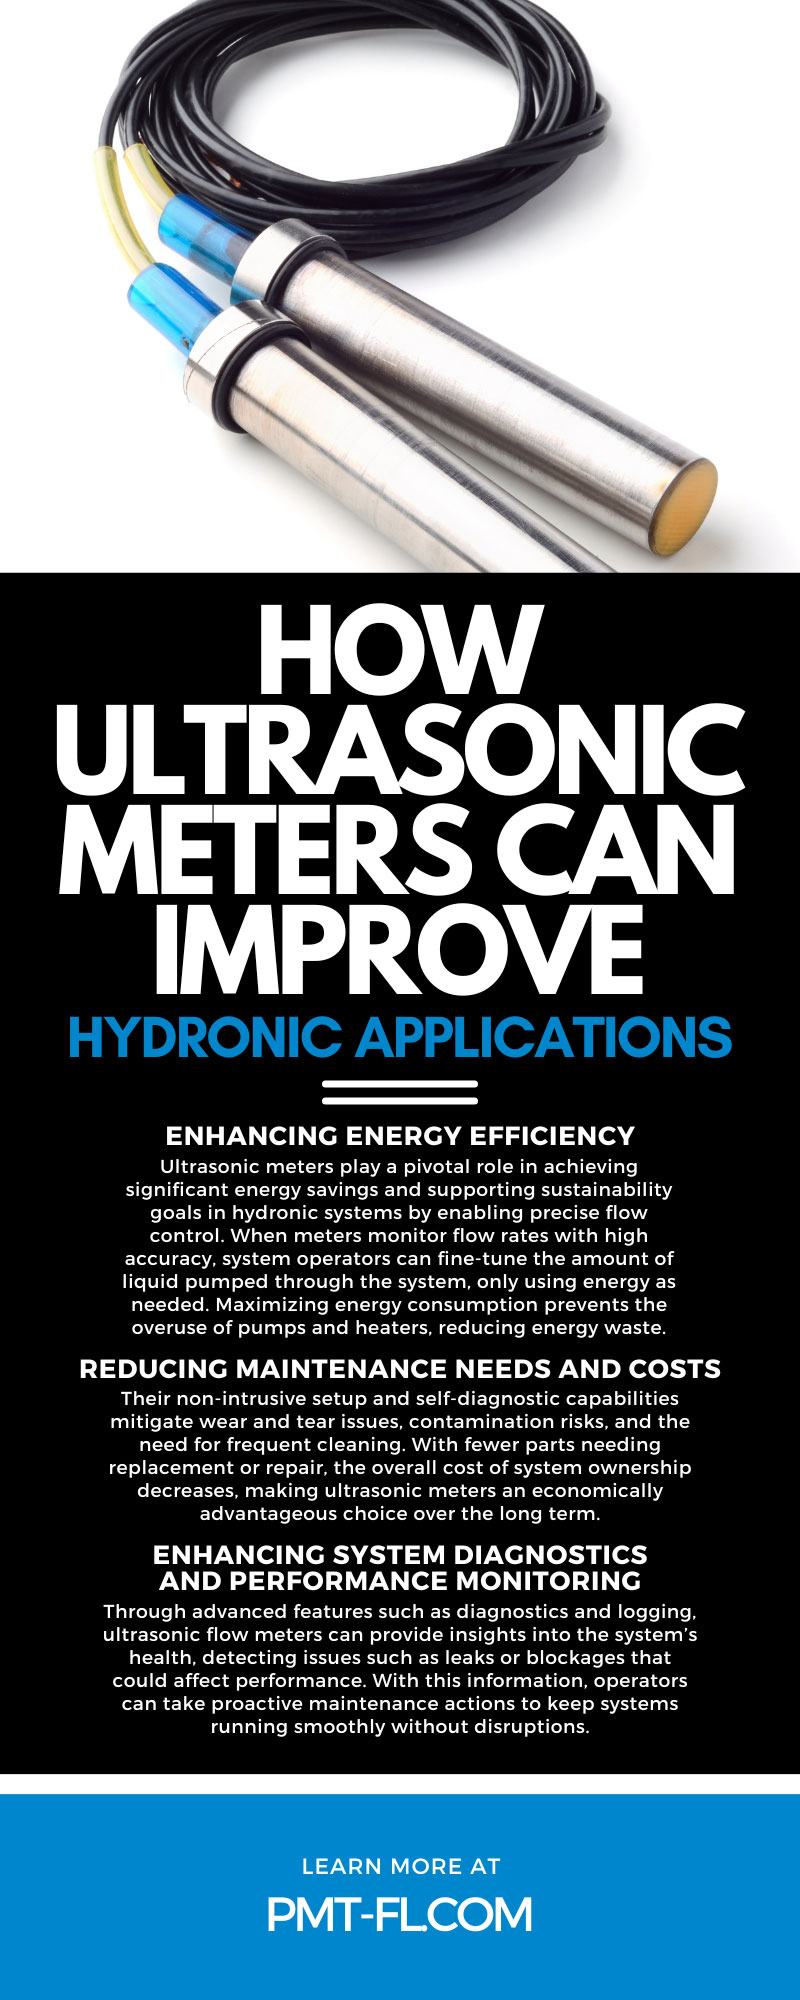 How Ultrasonic Meters Can Improve Hydronic Applications
